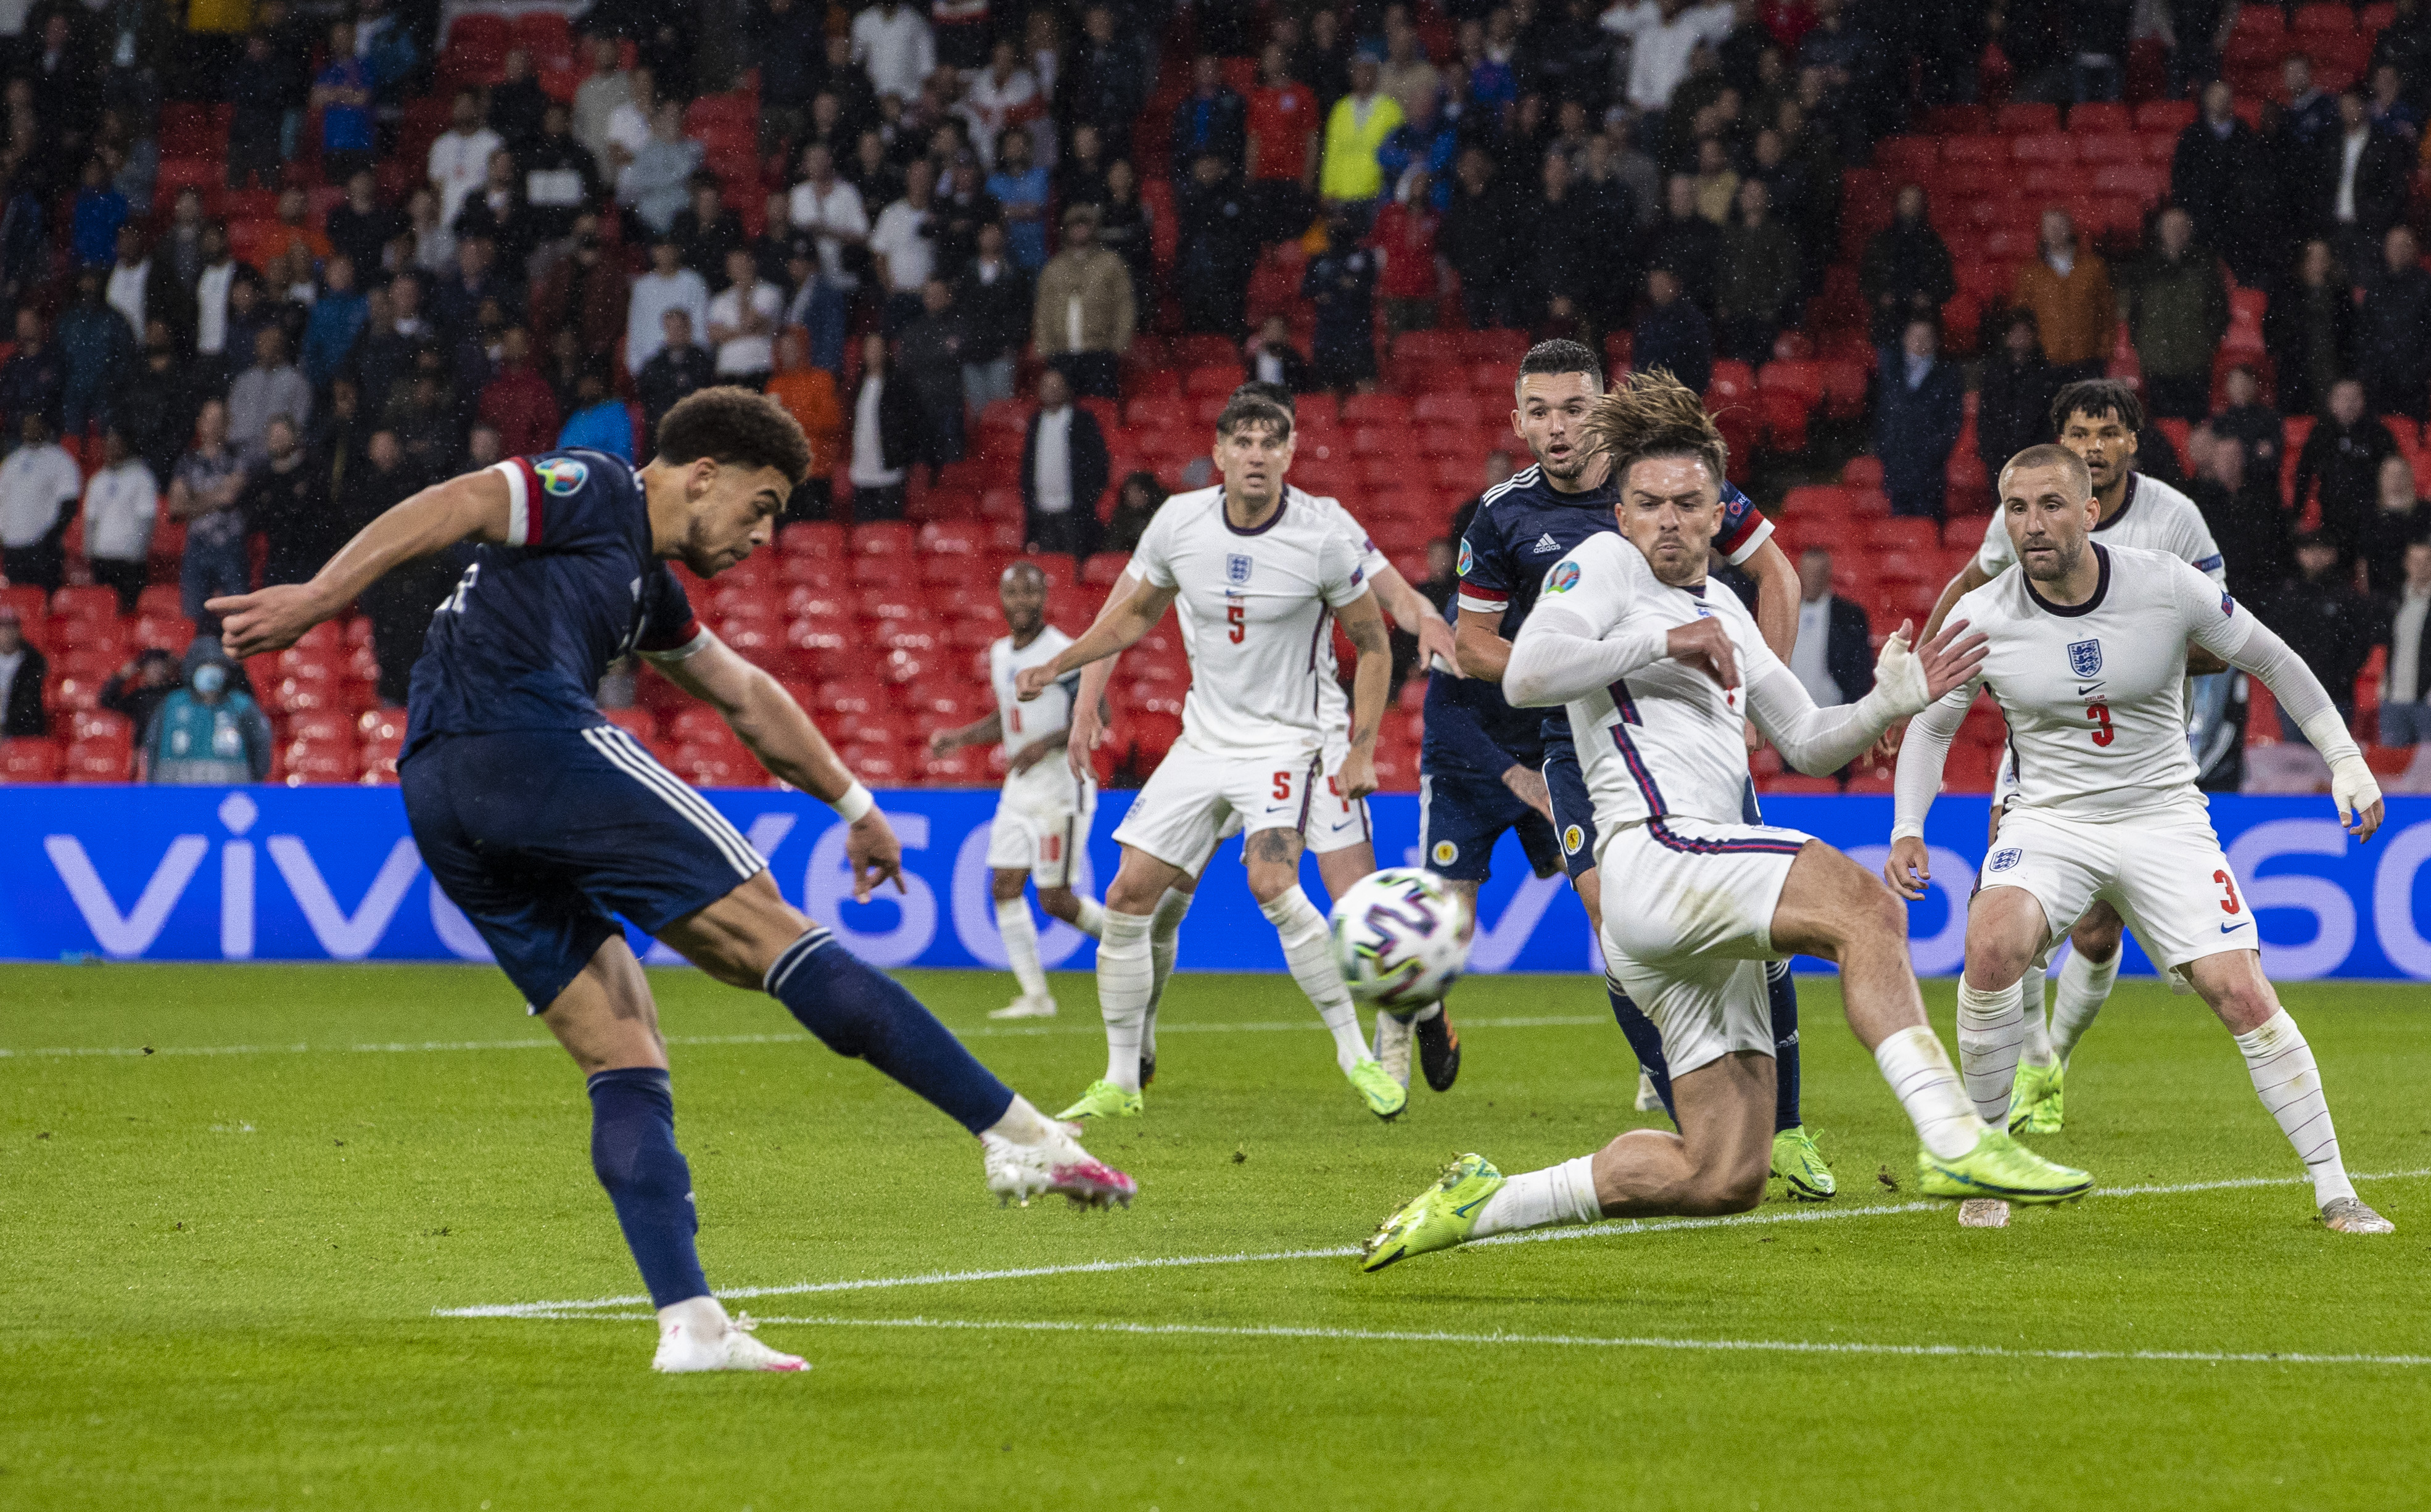 Euro 2020: Scotland finished bottom of the group despite a respectable 0-0 draw with England at Wembley.